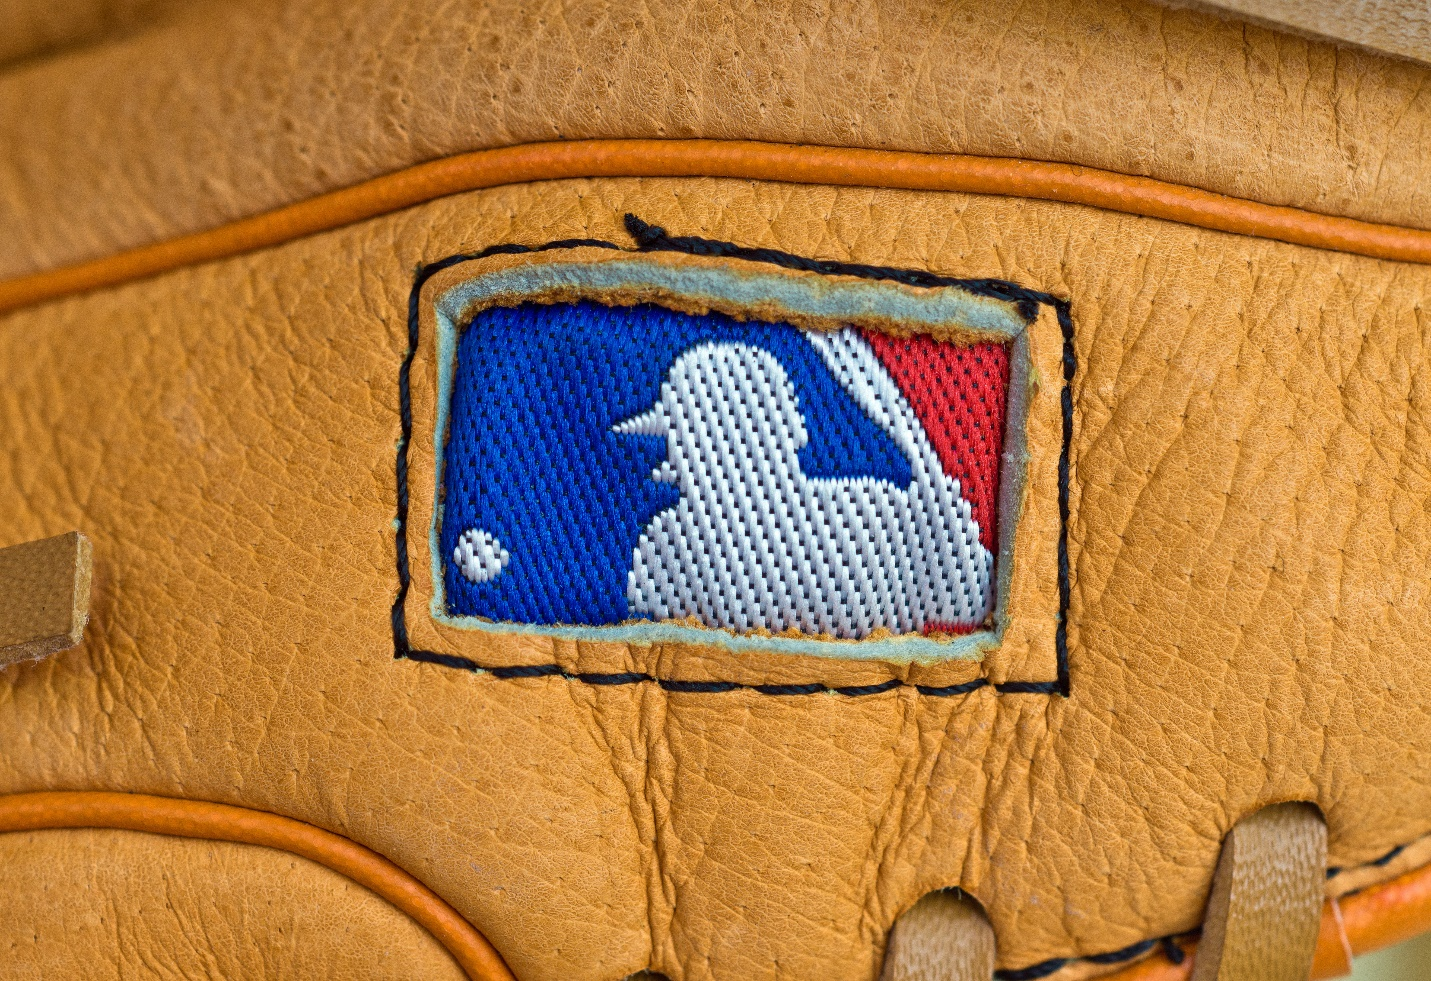 The MLB logo printed on a leather glove